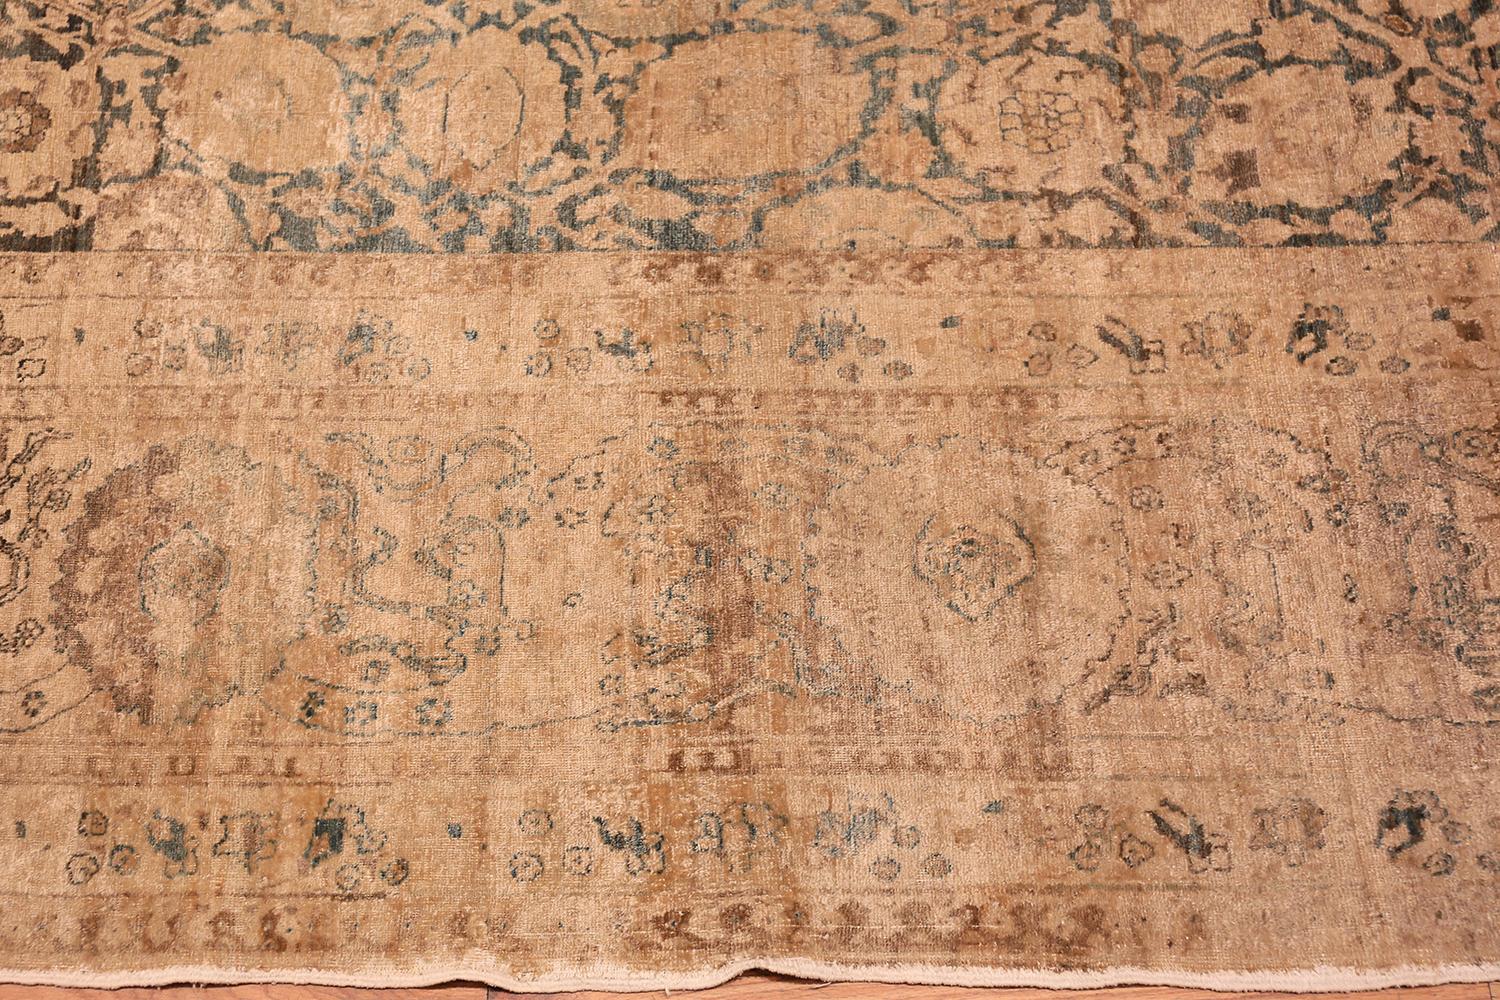 A beautiful and finely woven oversized antique Tabriz carpet that features the iconic Persian vase design, country of origin / rug type: Persian rugs, date circa 1910, size: 12 ft. 2 in x 20 ft. 2 in (3.71 m x 6.15 m).